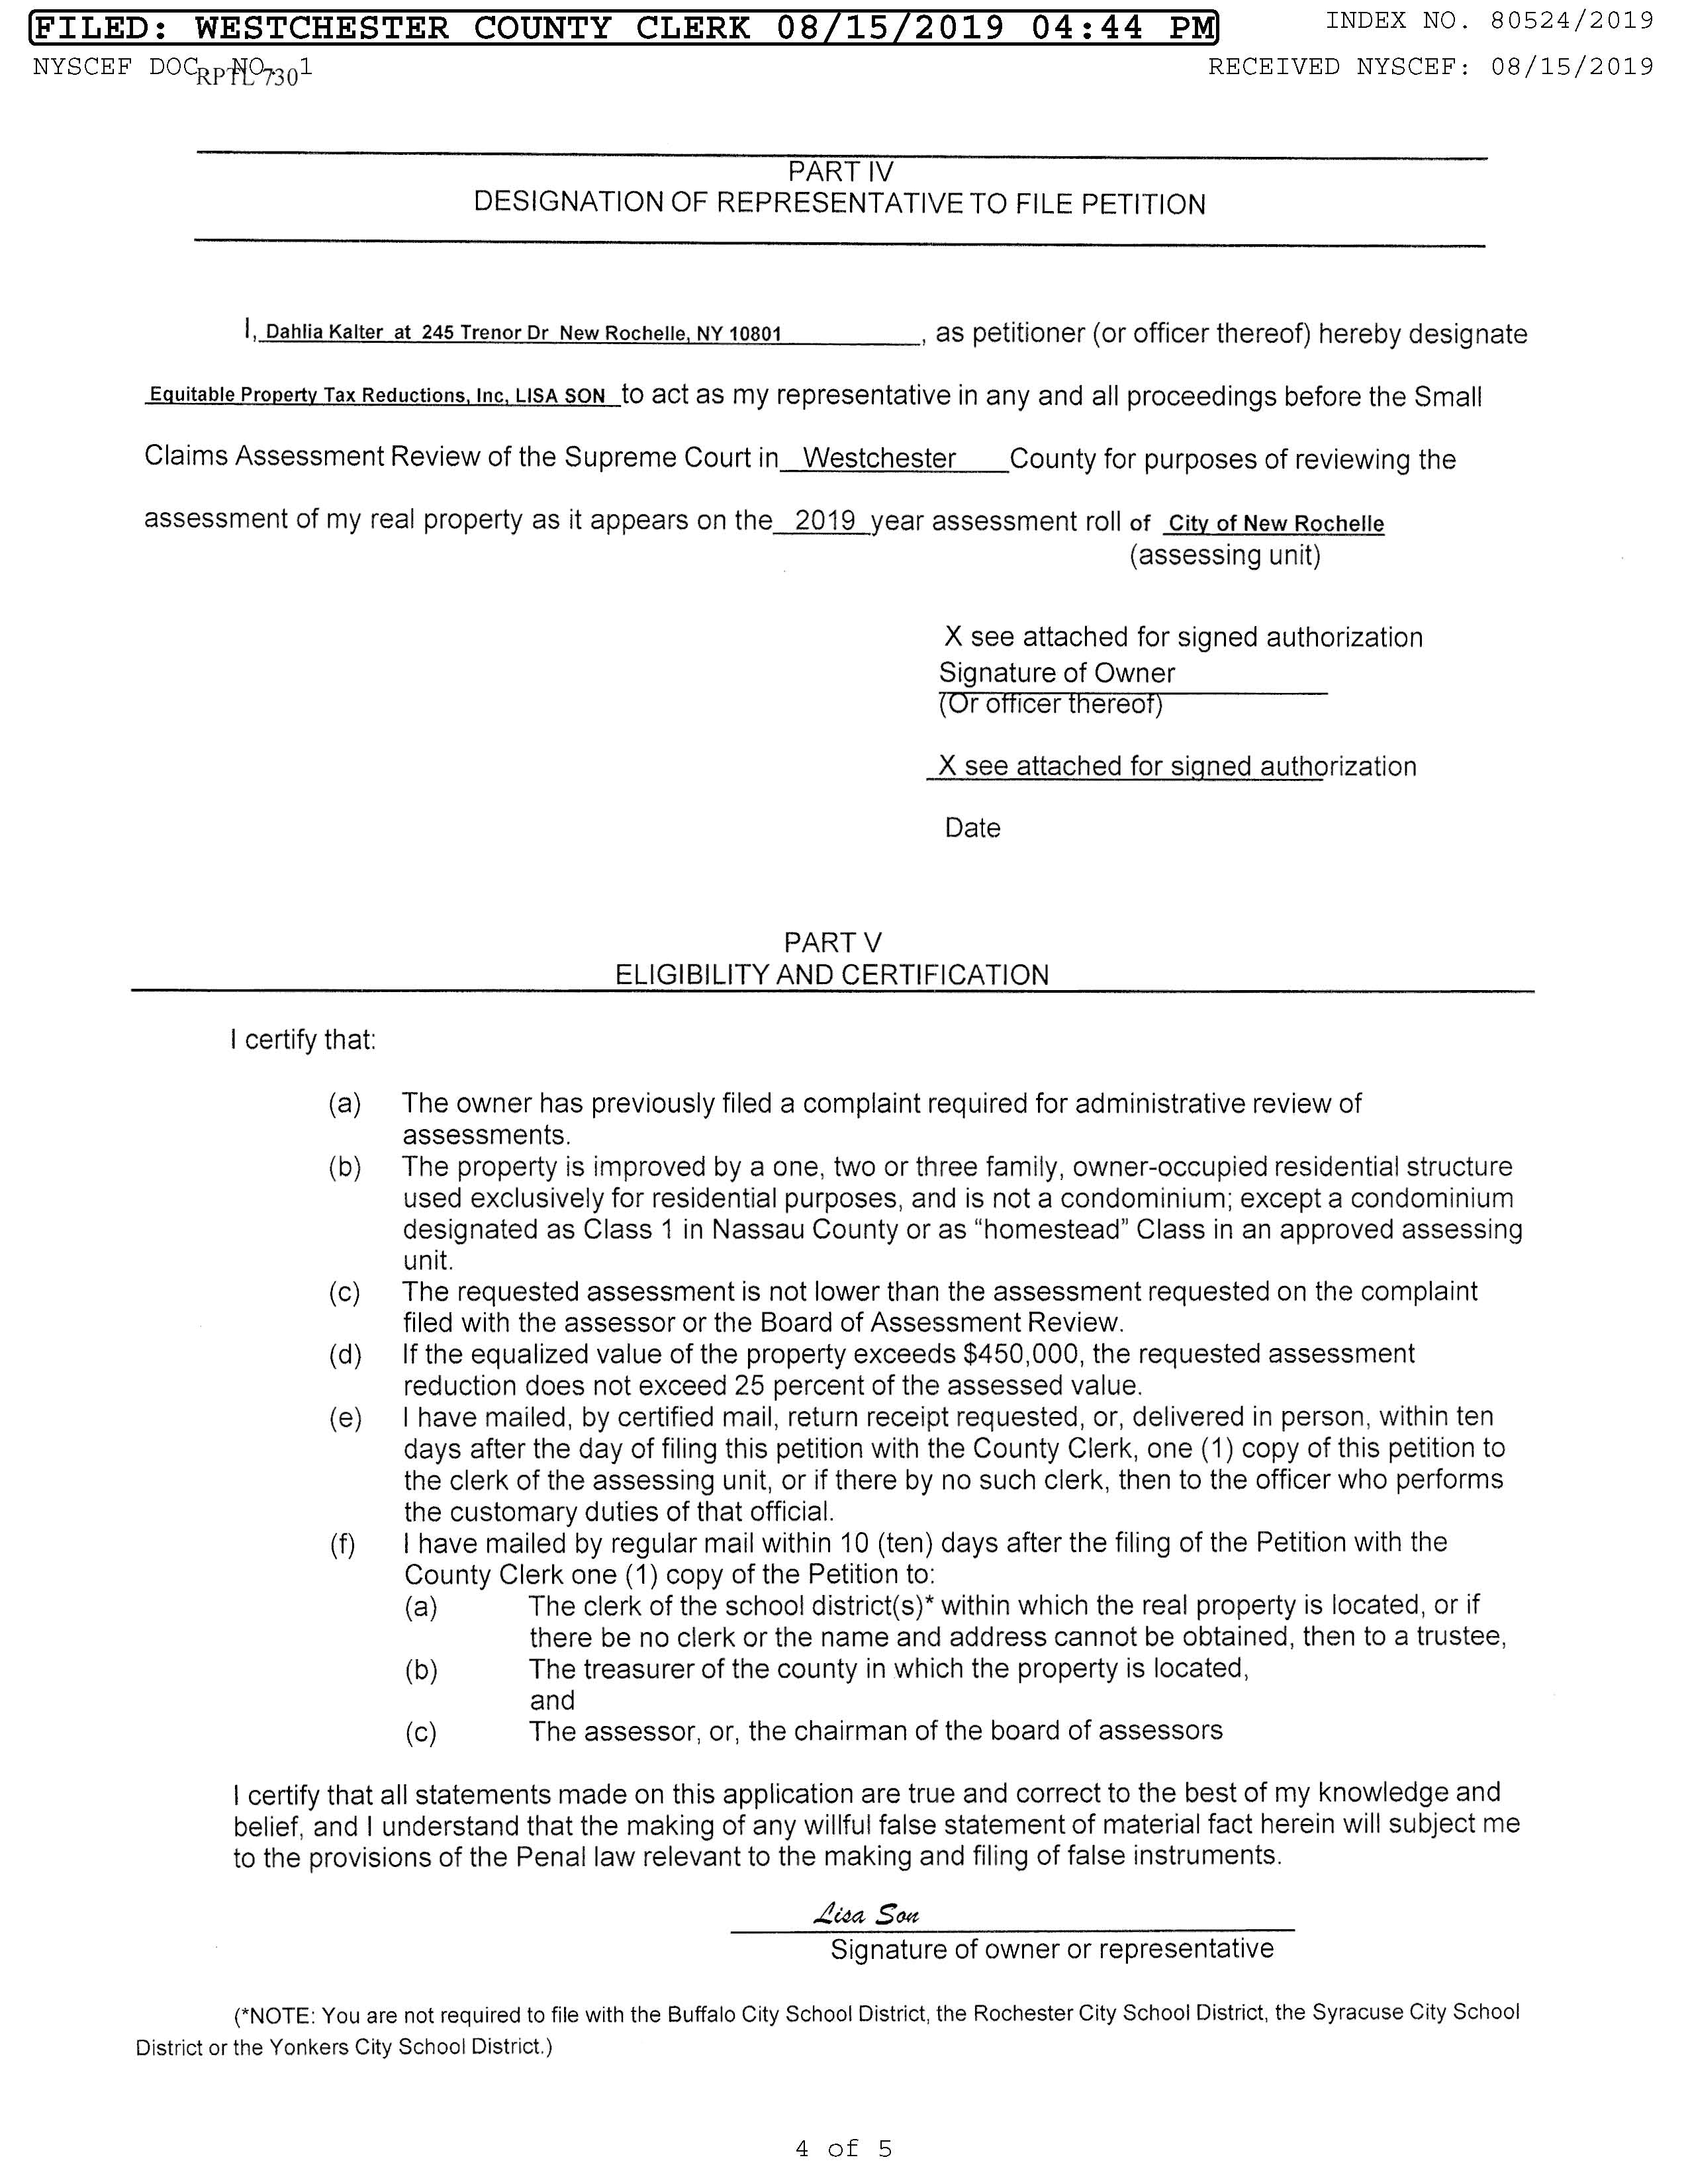 80524_2019_Dahlia_Kalter_v_New_Rochelle_City_SCAR_PETITION_1_Page_4